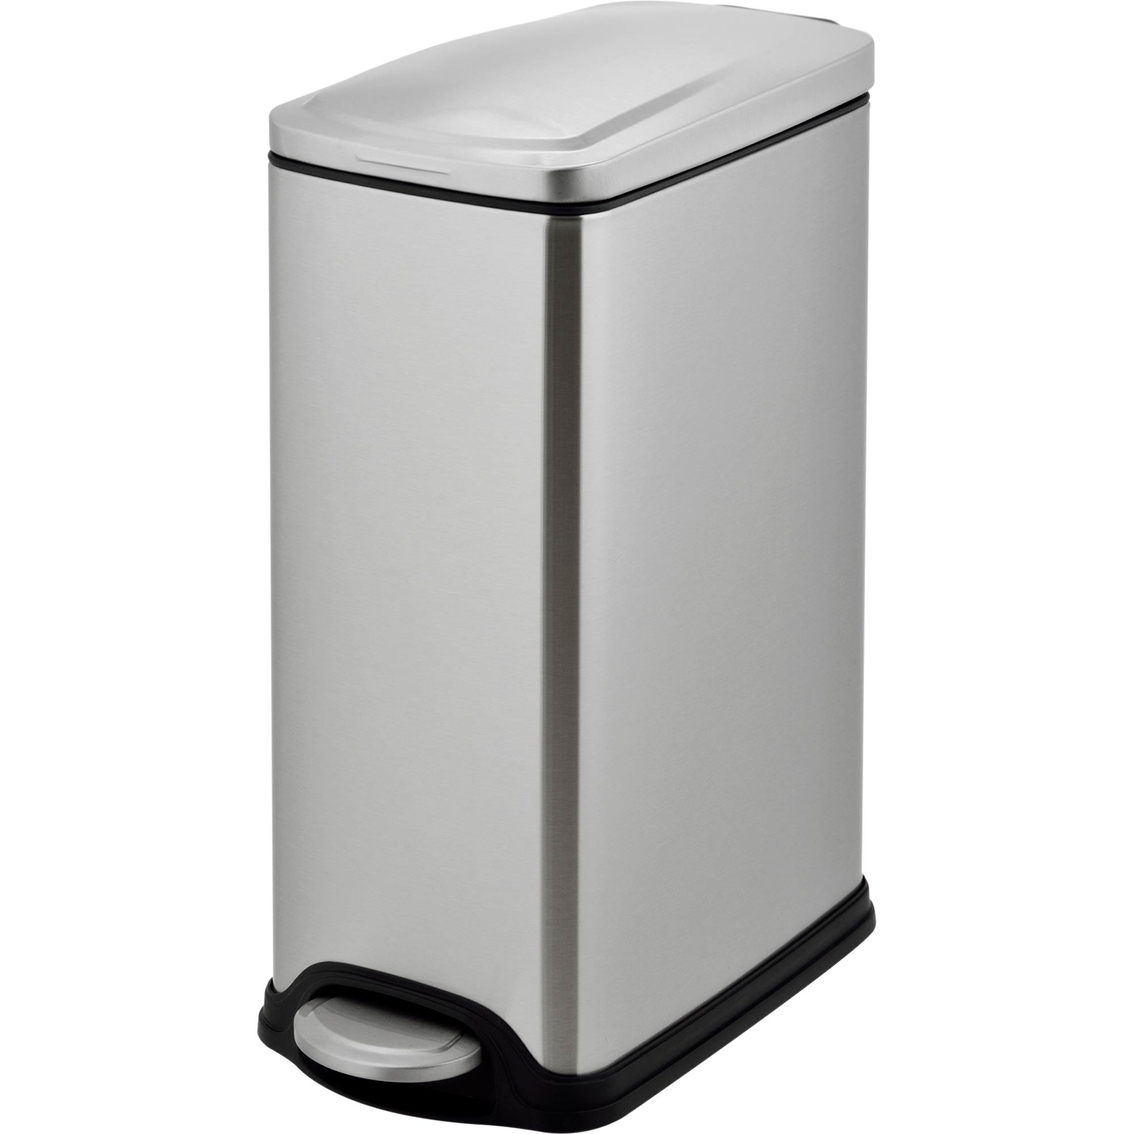 Simply Perfect Slim Trash Bin With Stainless Steel Lid 10l, Trash Cans, Household